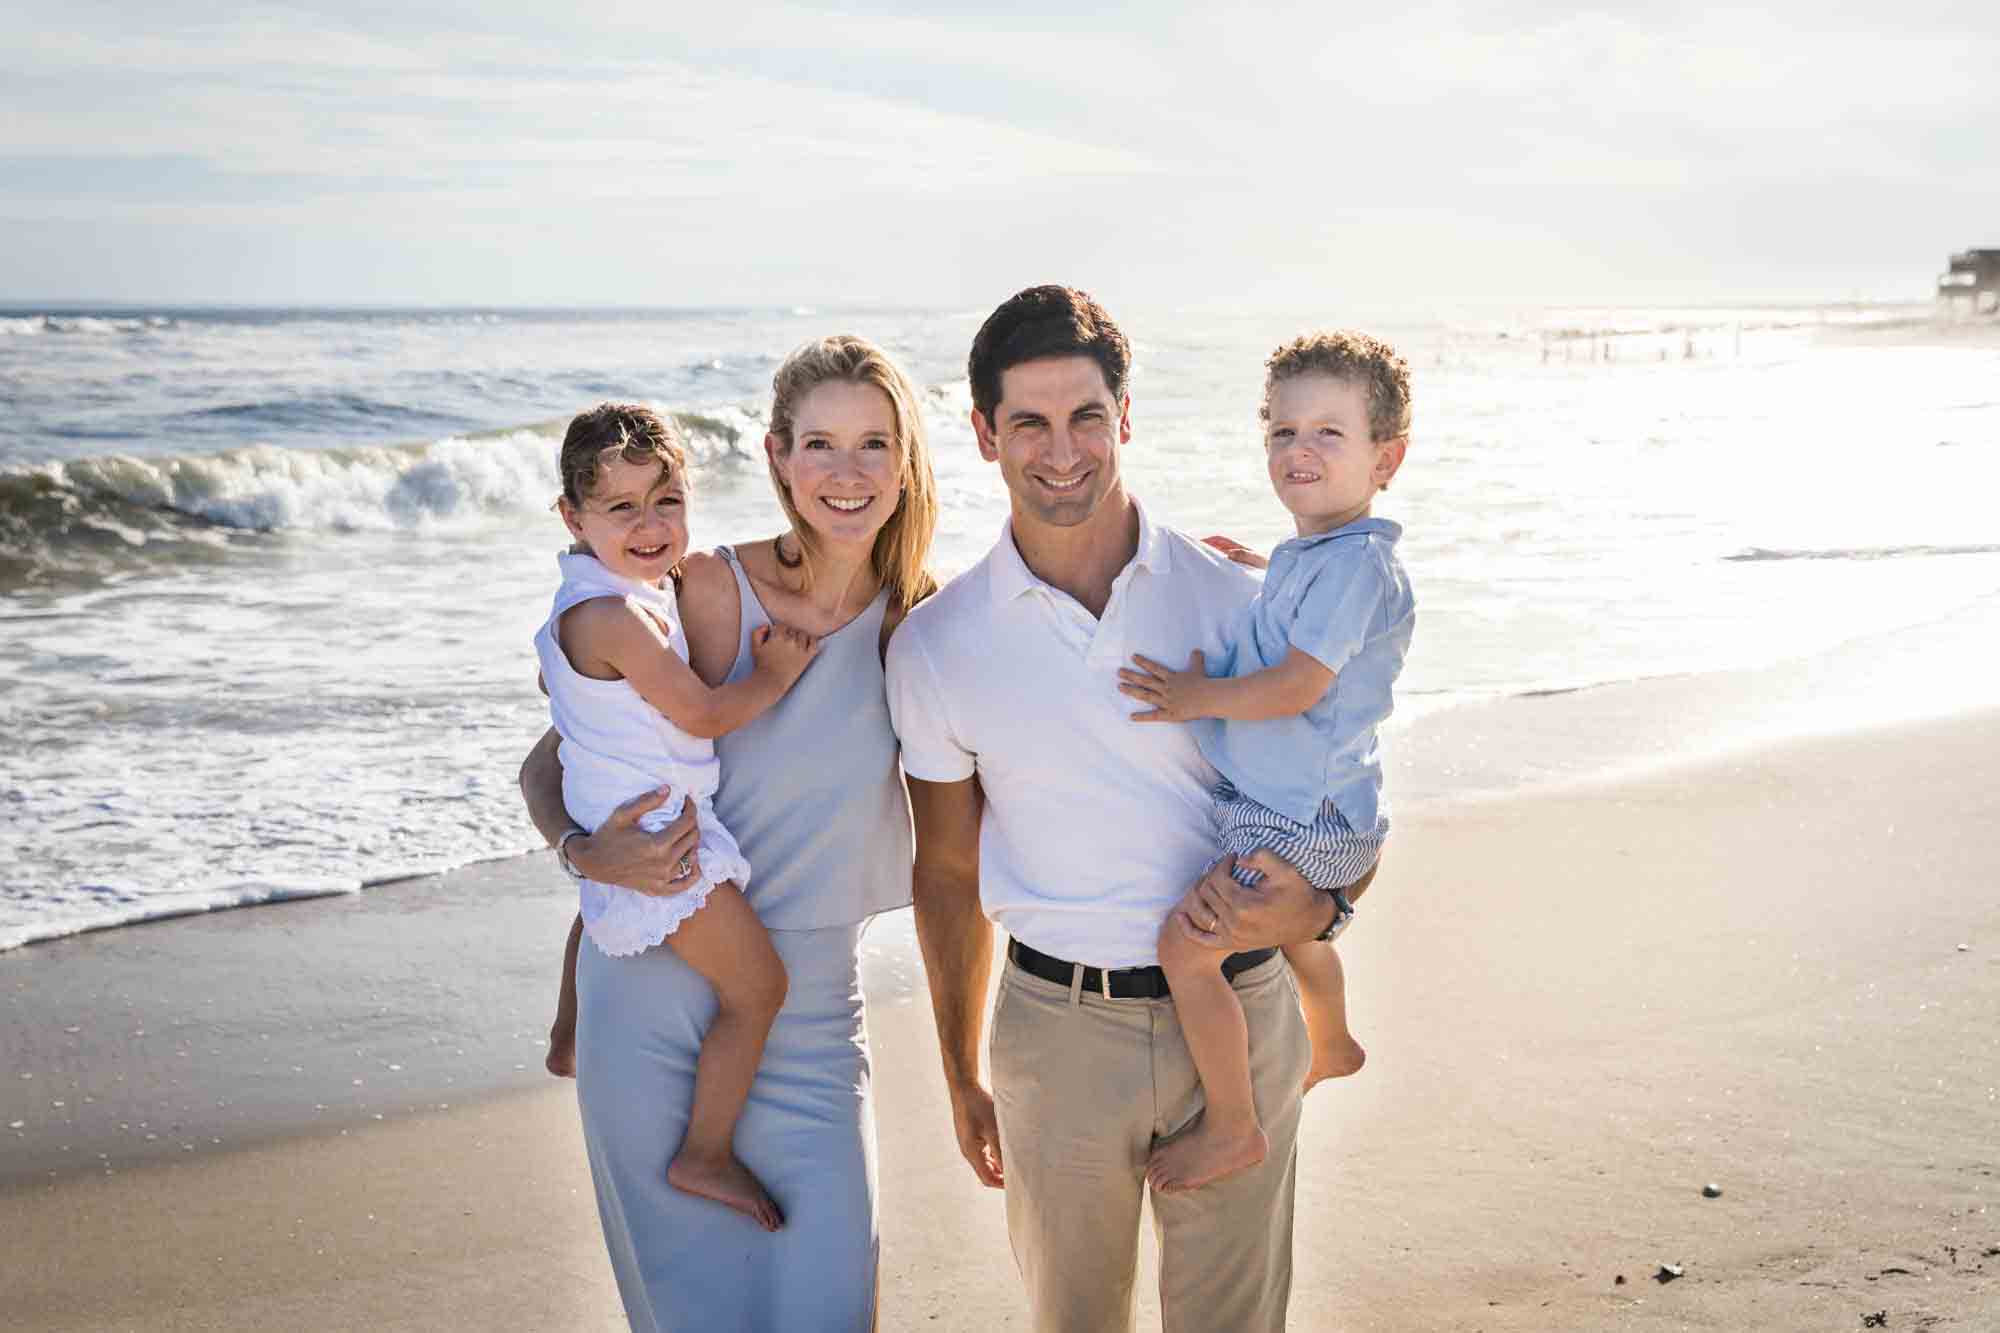 Parents holding two small children on beach in front of ocean for an article on beach family portrait tips